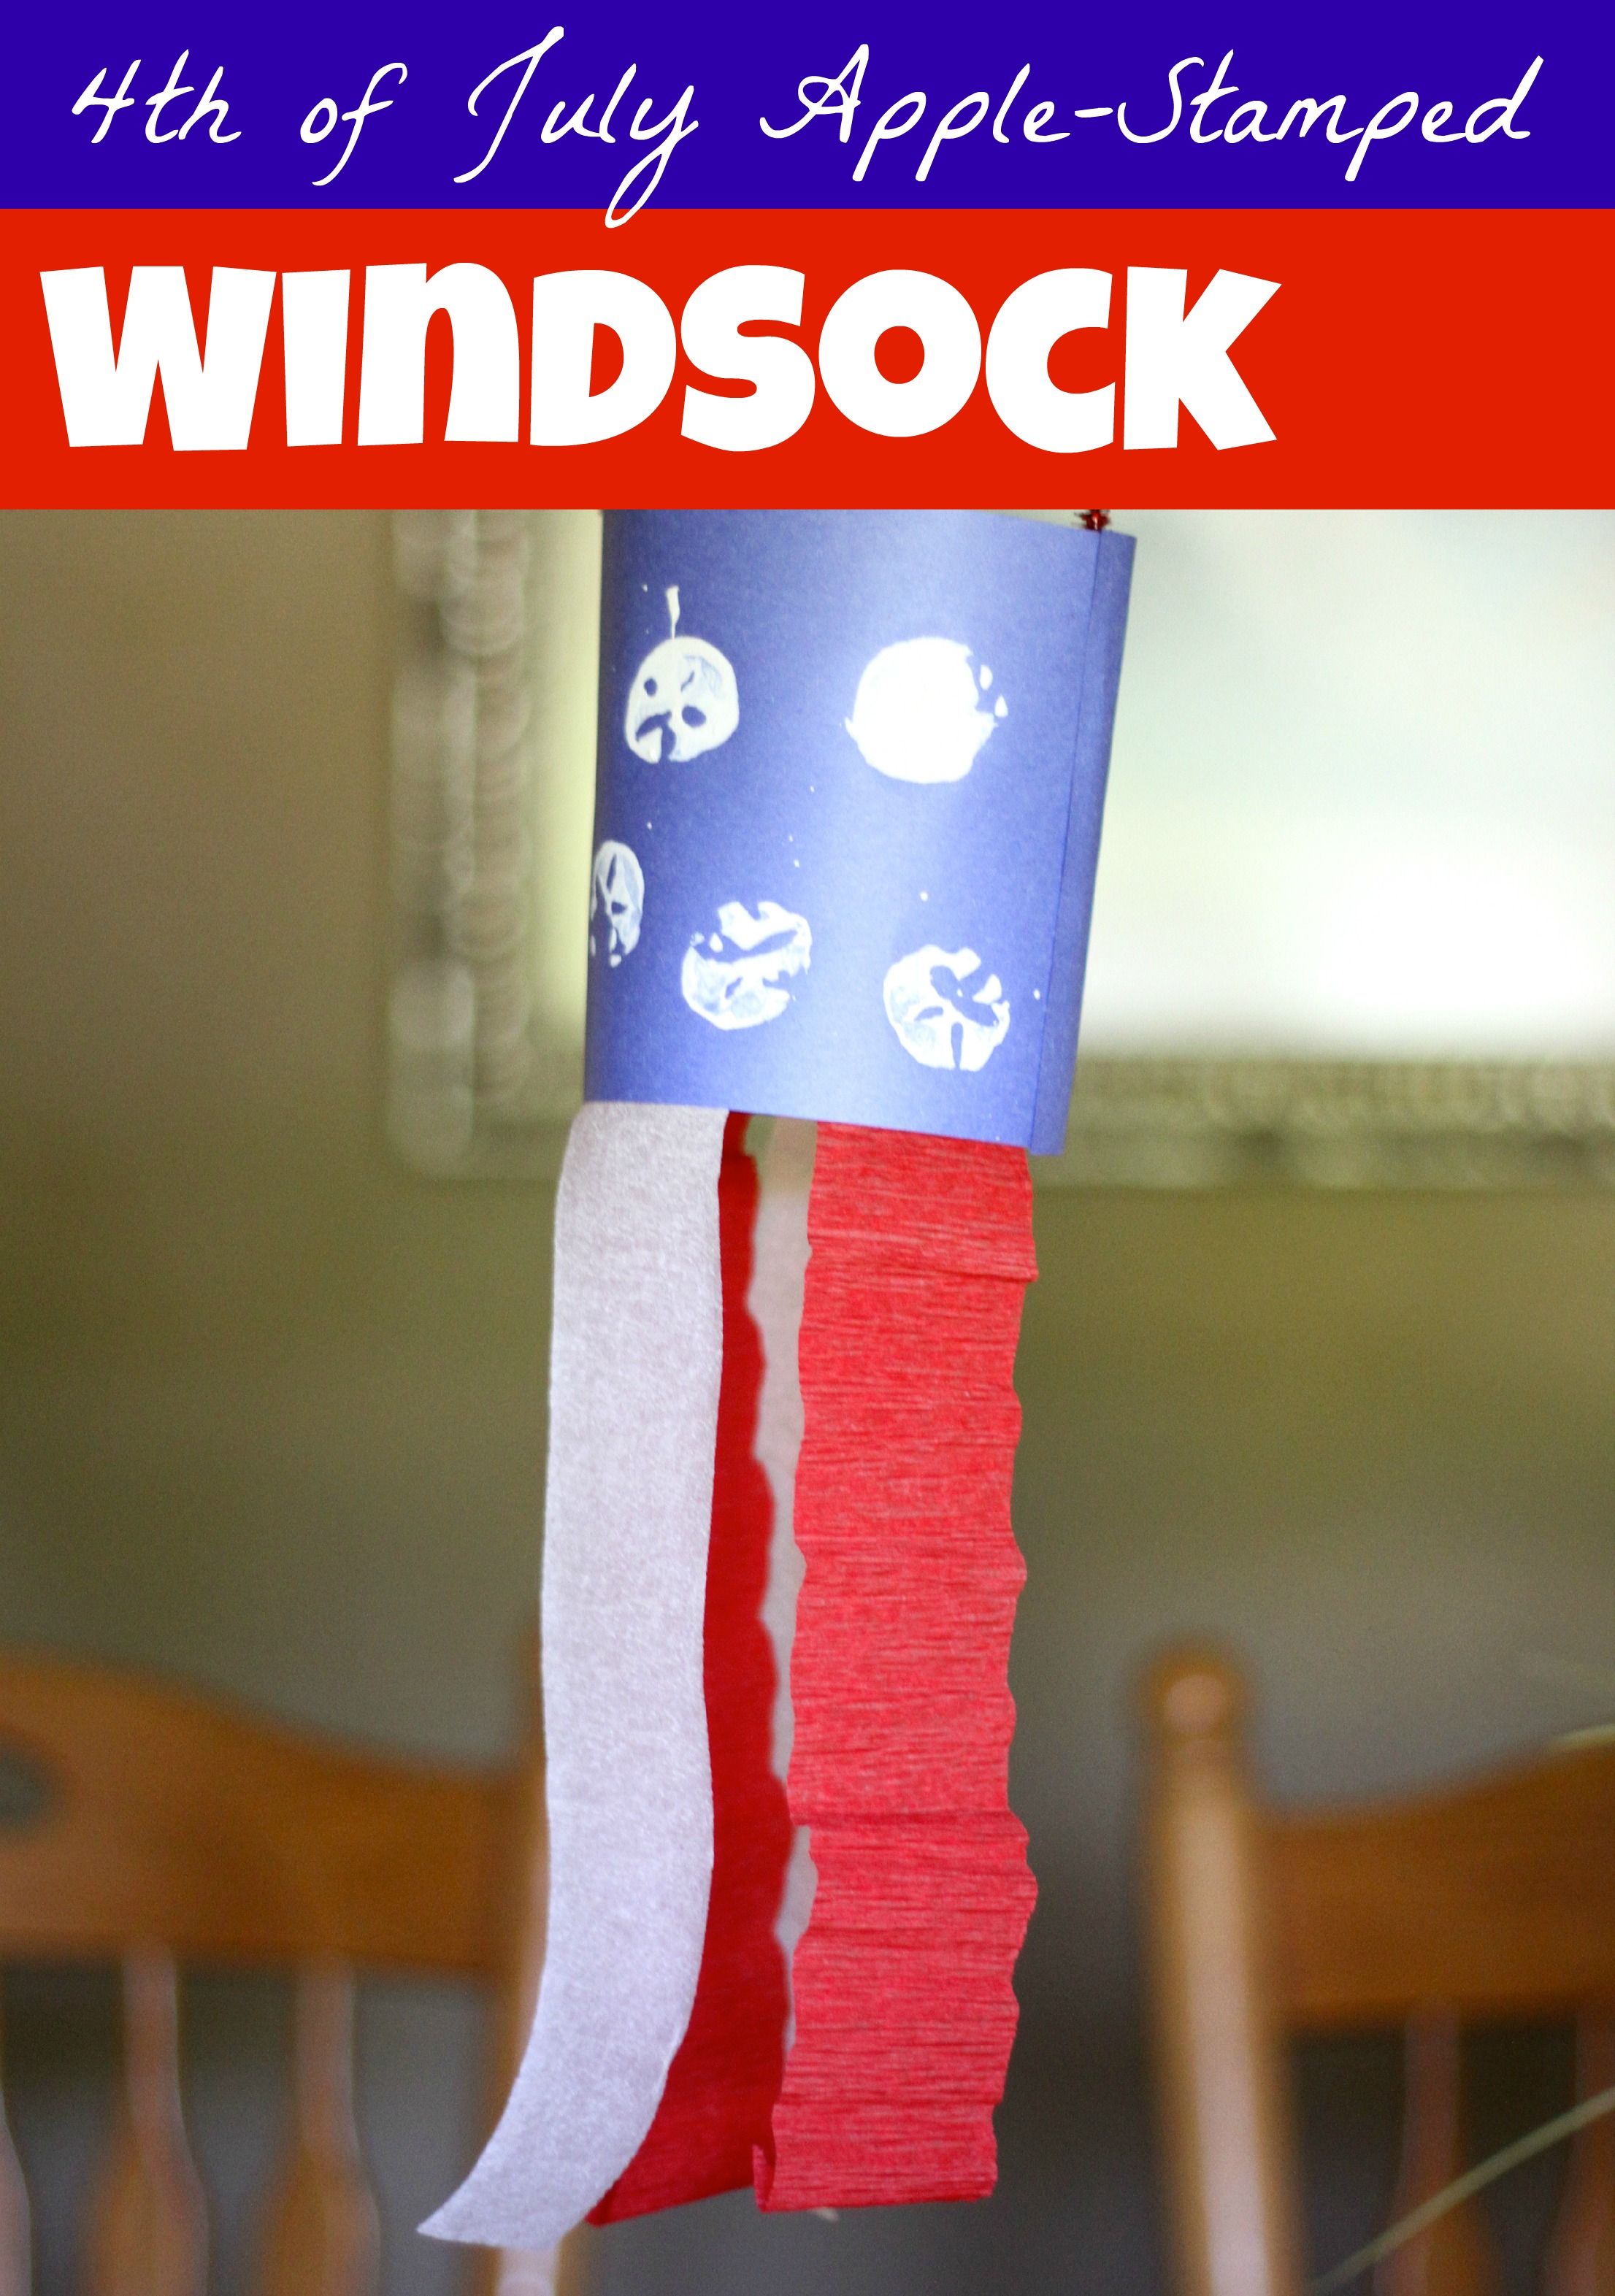 4th of July AppleStamped Windsock I Can Teach My Child!